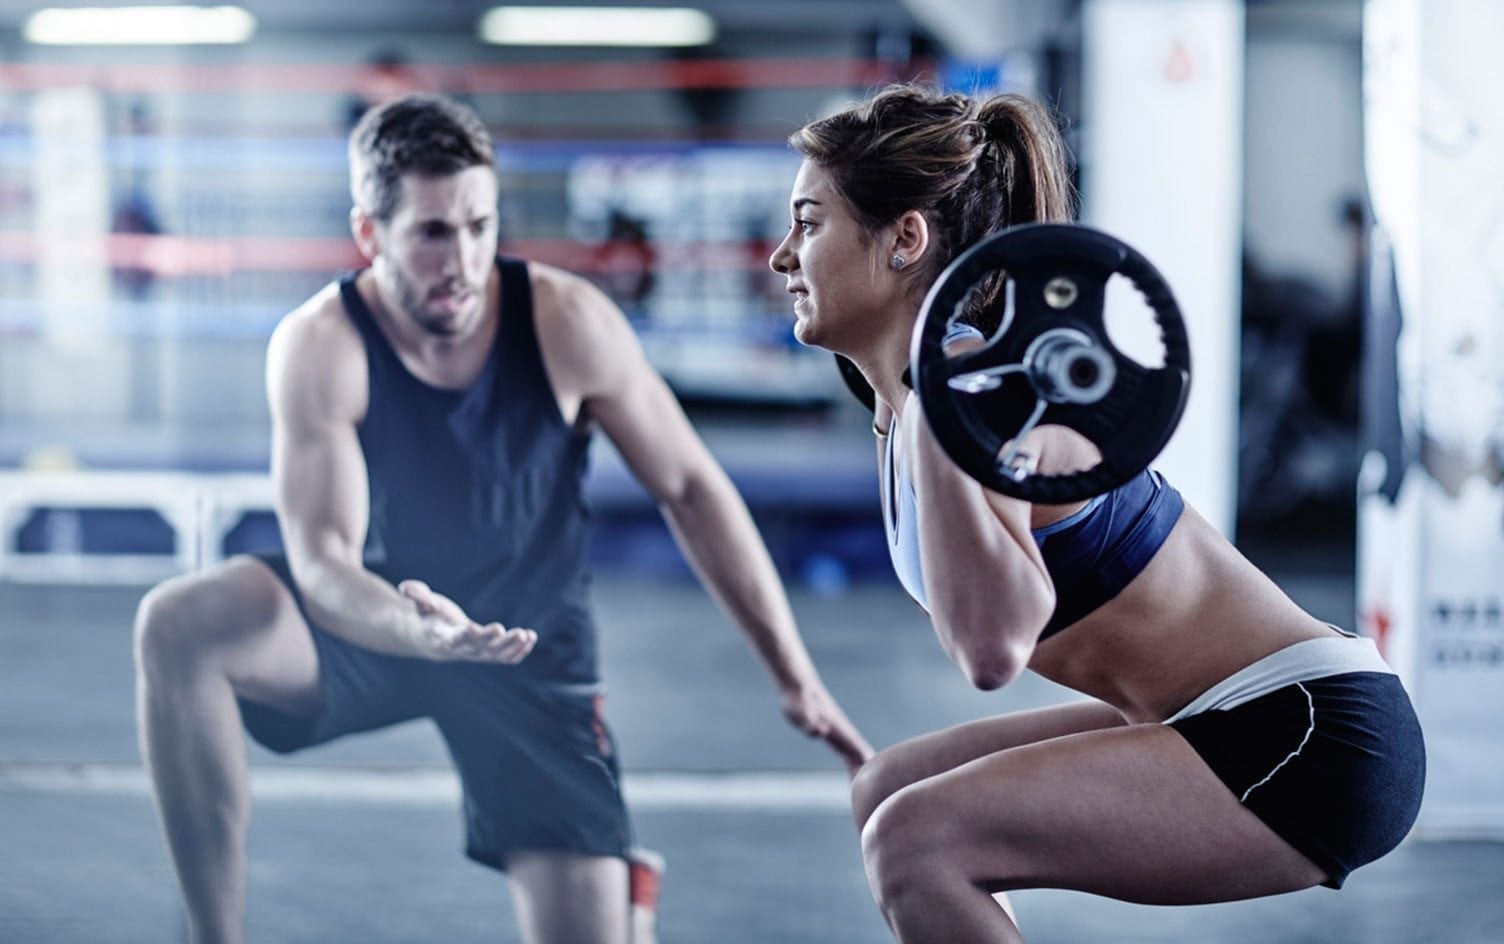 What to look for to get a personal trainer?